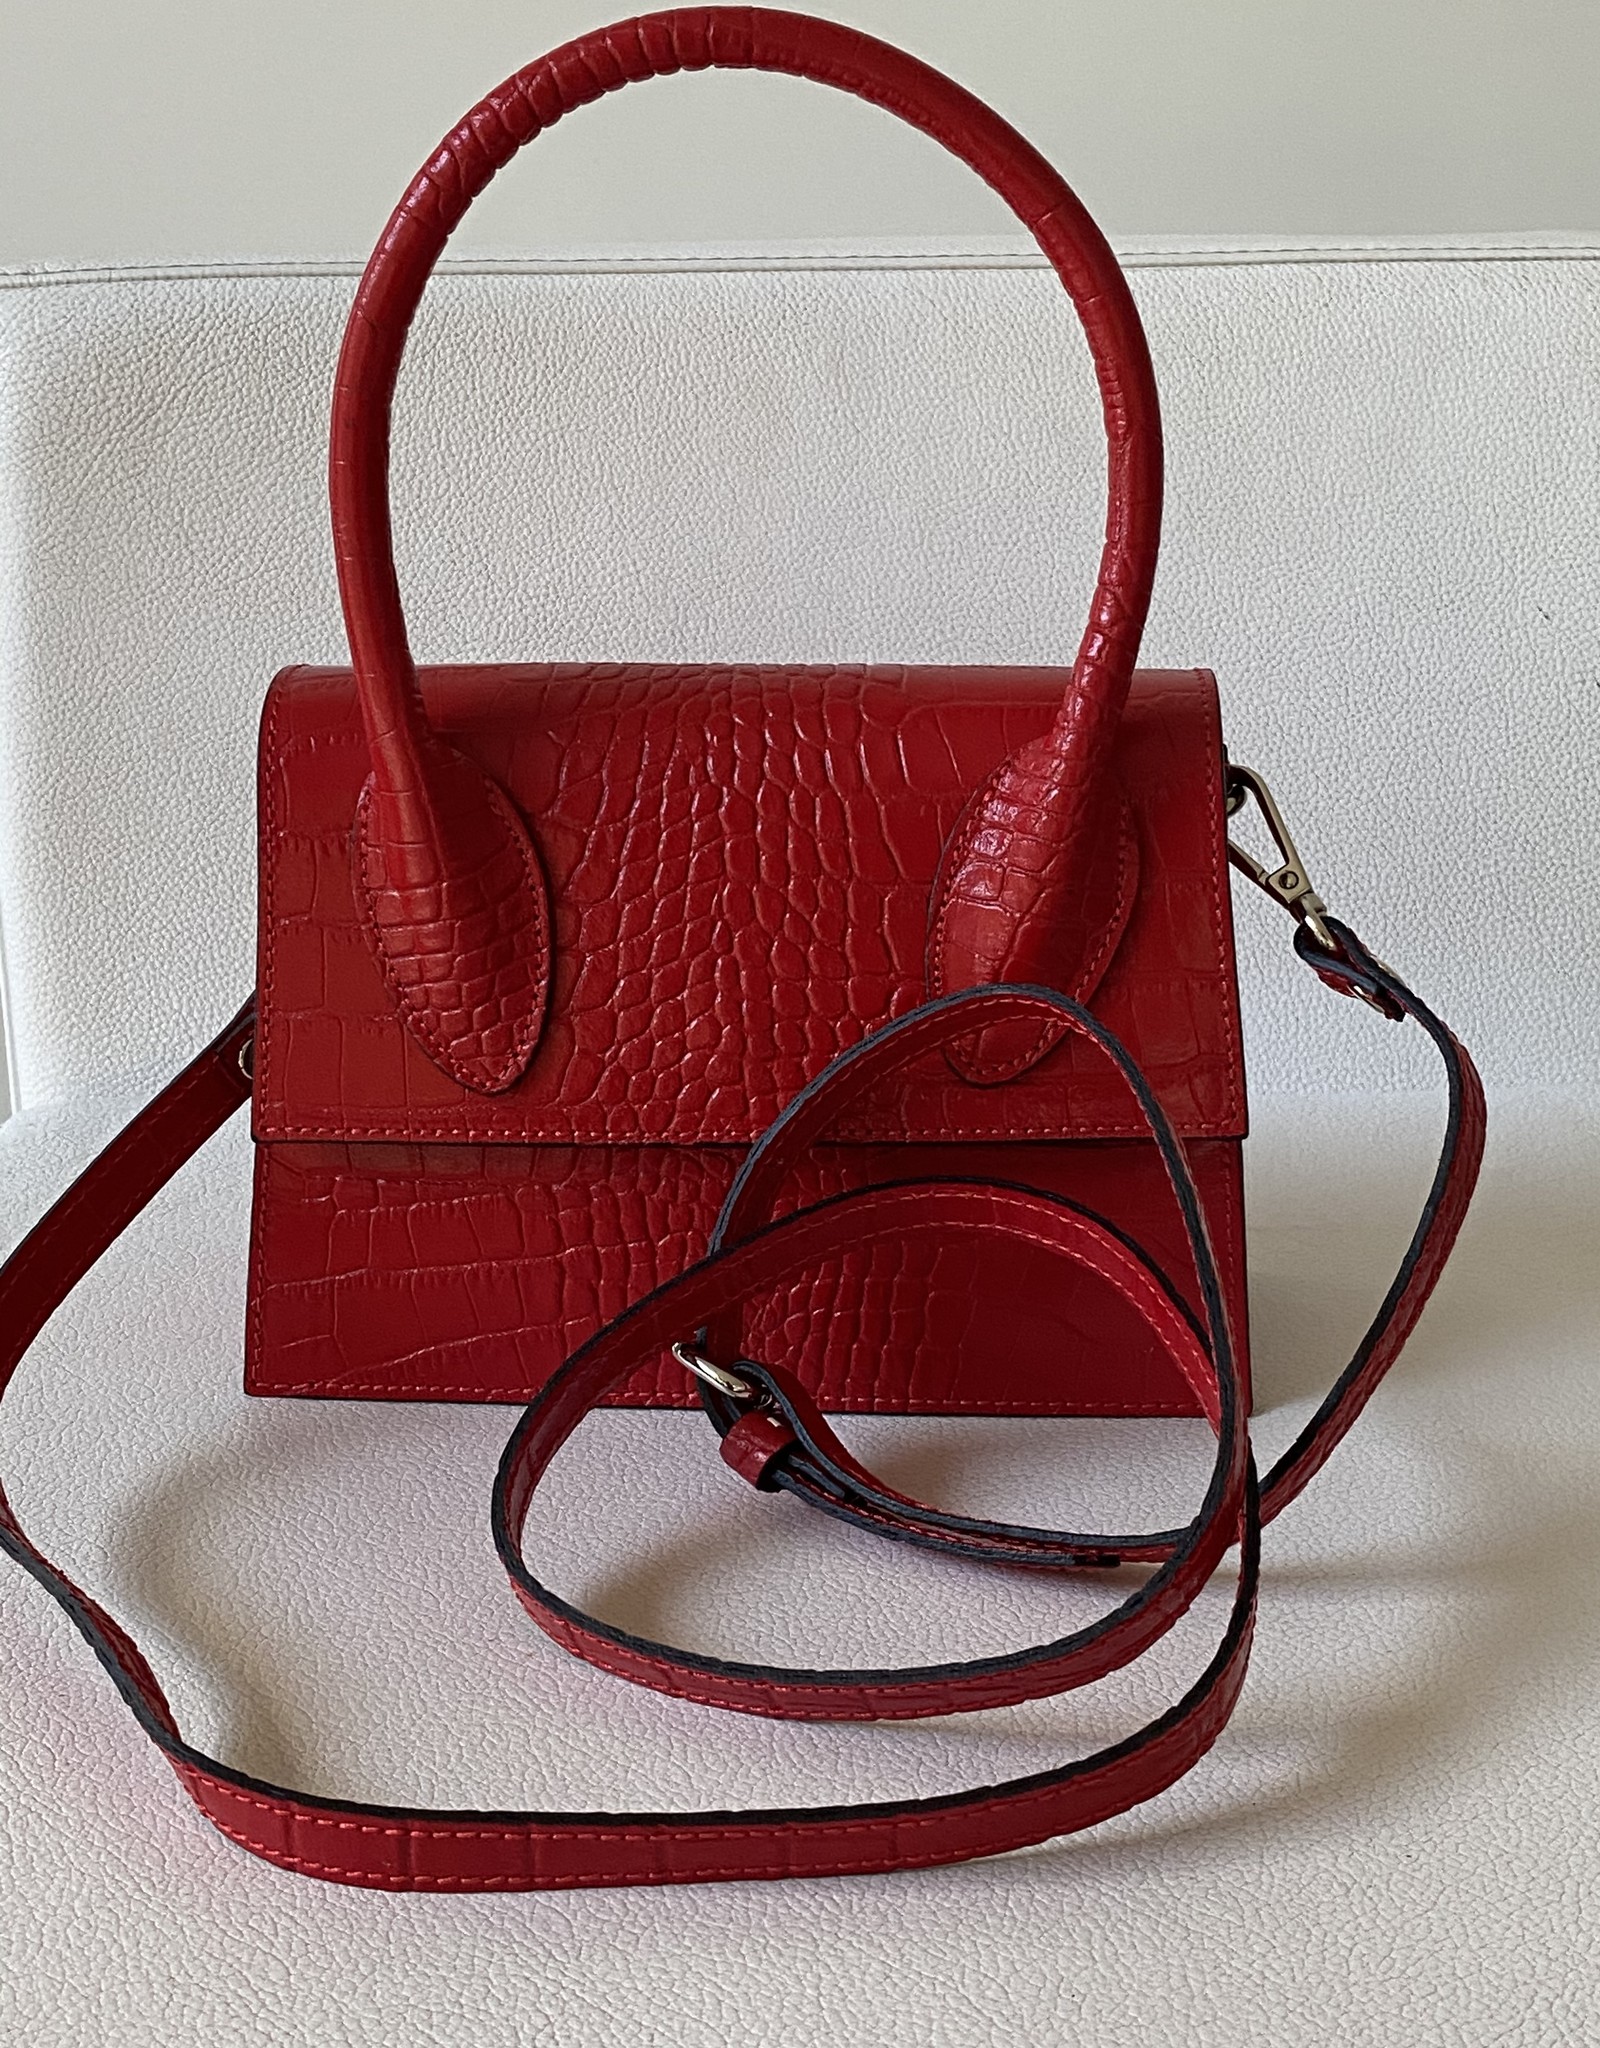 Giuliano Classy little handbag in crocoleather with fix handle and with long shoulderbelt.